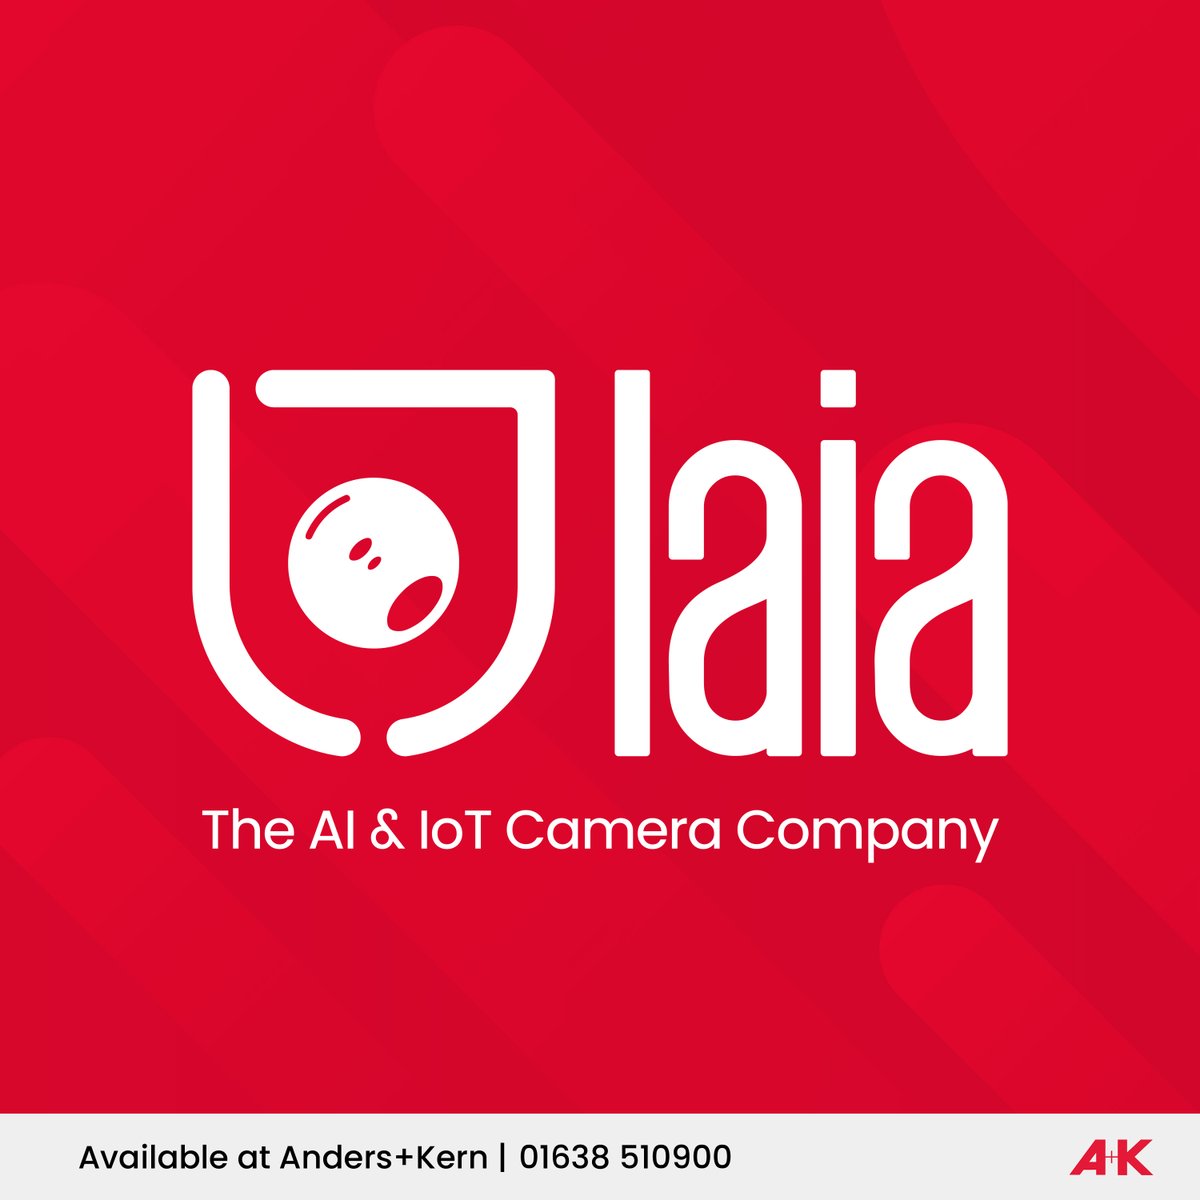 A+K announce a new UK distribution partnership with Laia, a PTZ camera and audio solutions leader.
hubs.la/Q02vxSnH0

#avtweeps #workspace #PTZcameras #iot #audio